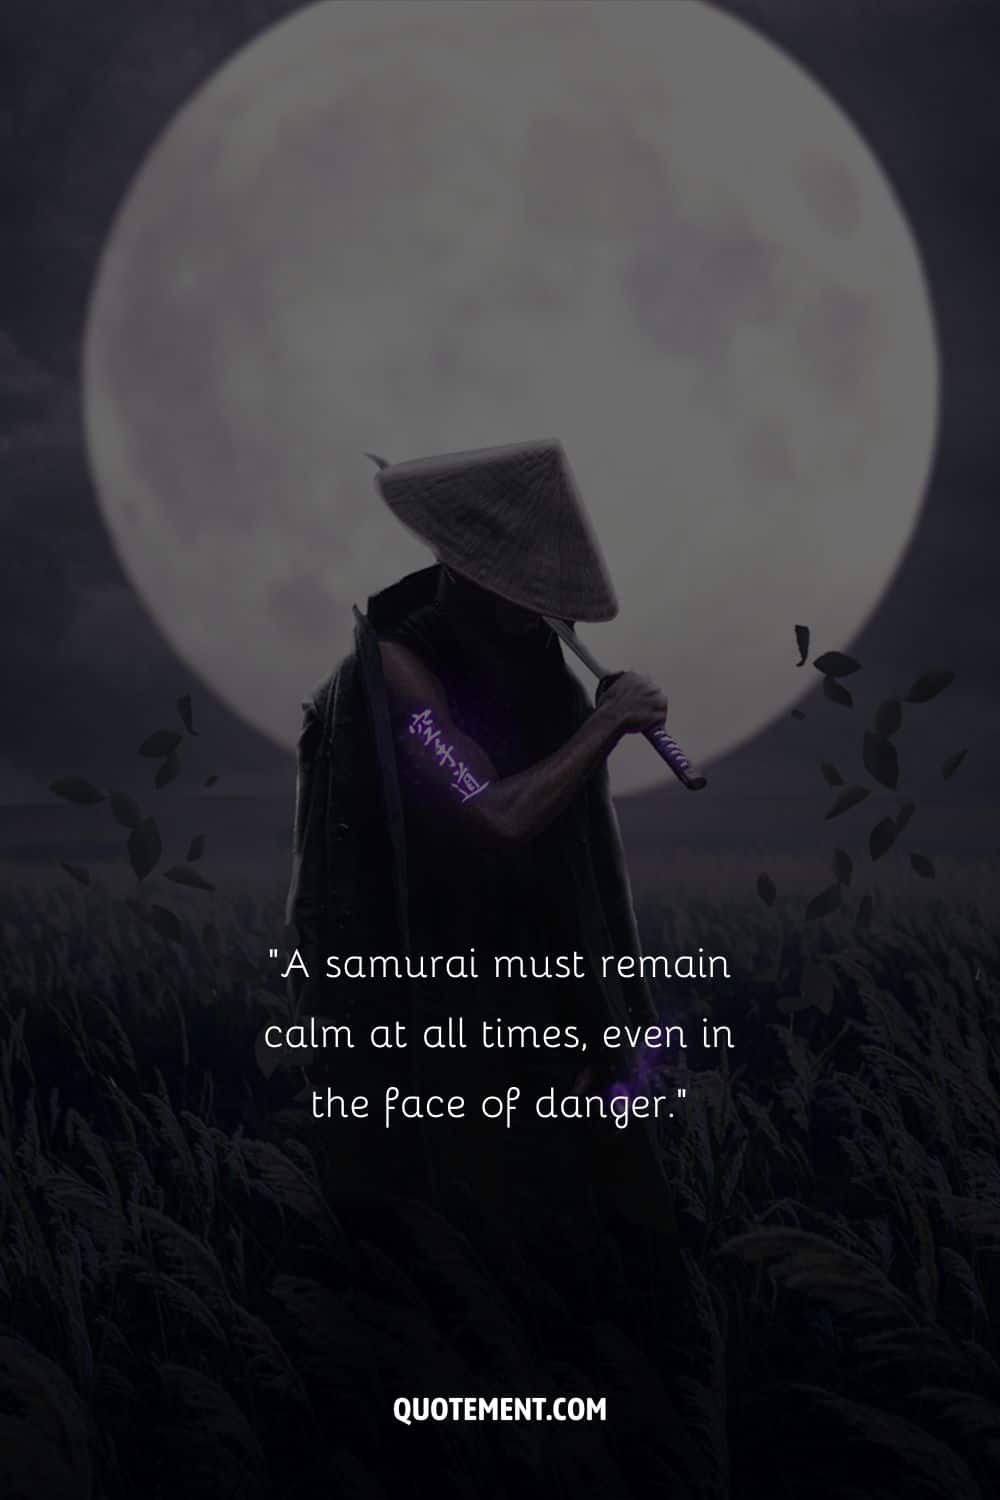 A lone warrior embraces radiance of the full moon representing badass samurai quote